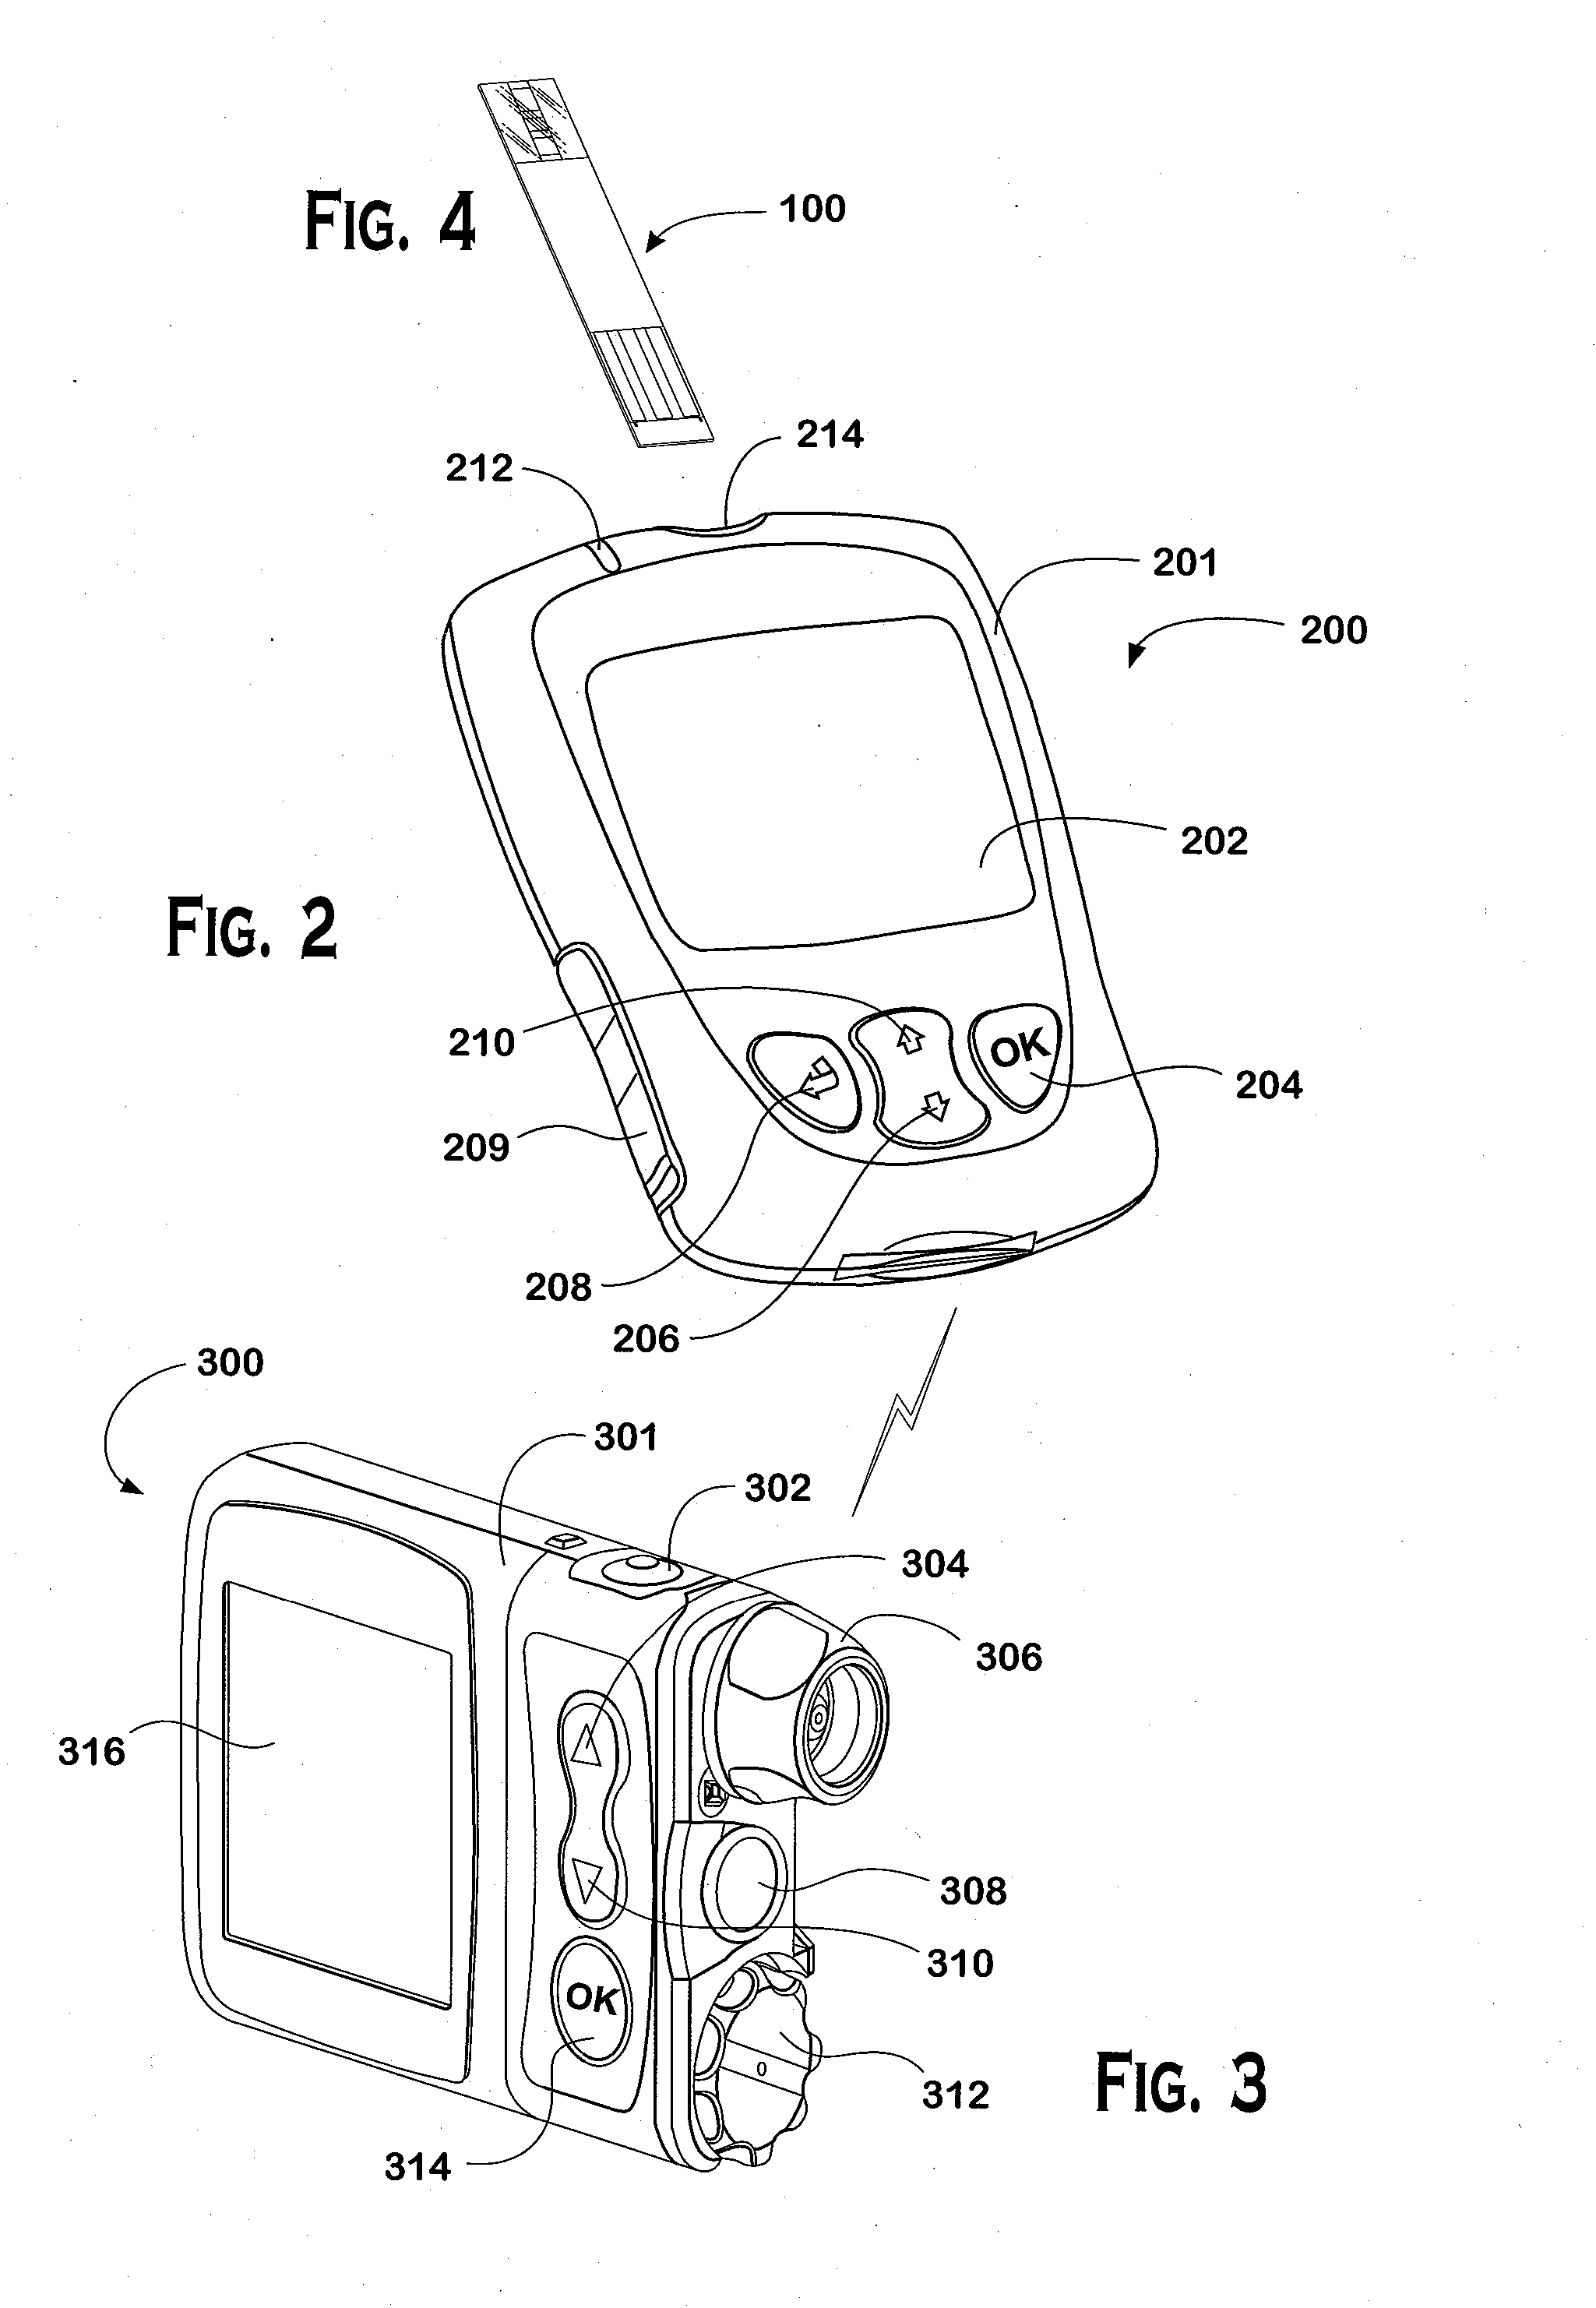 Methods to pair a medical device and at least a remote controller for such medical device